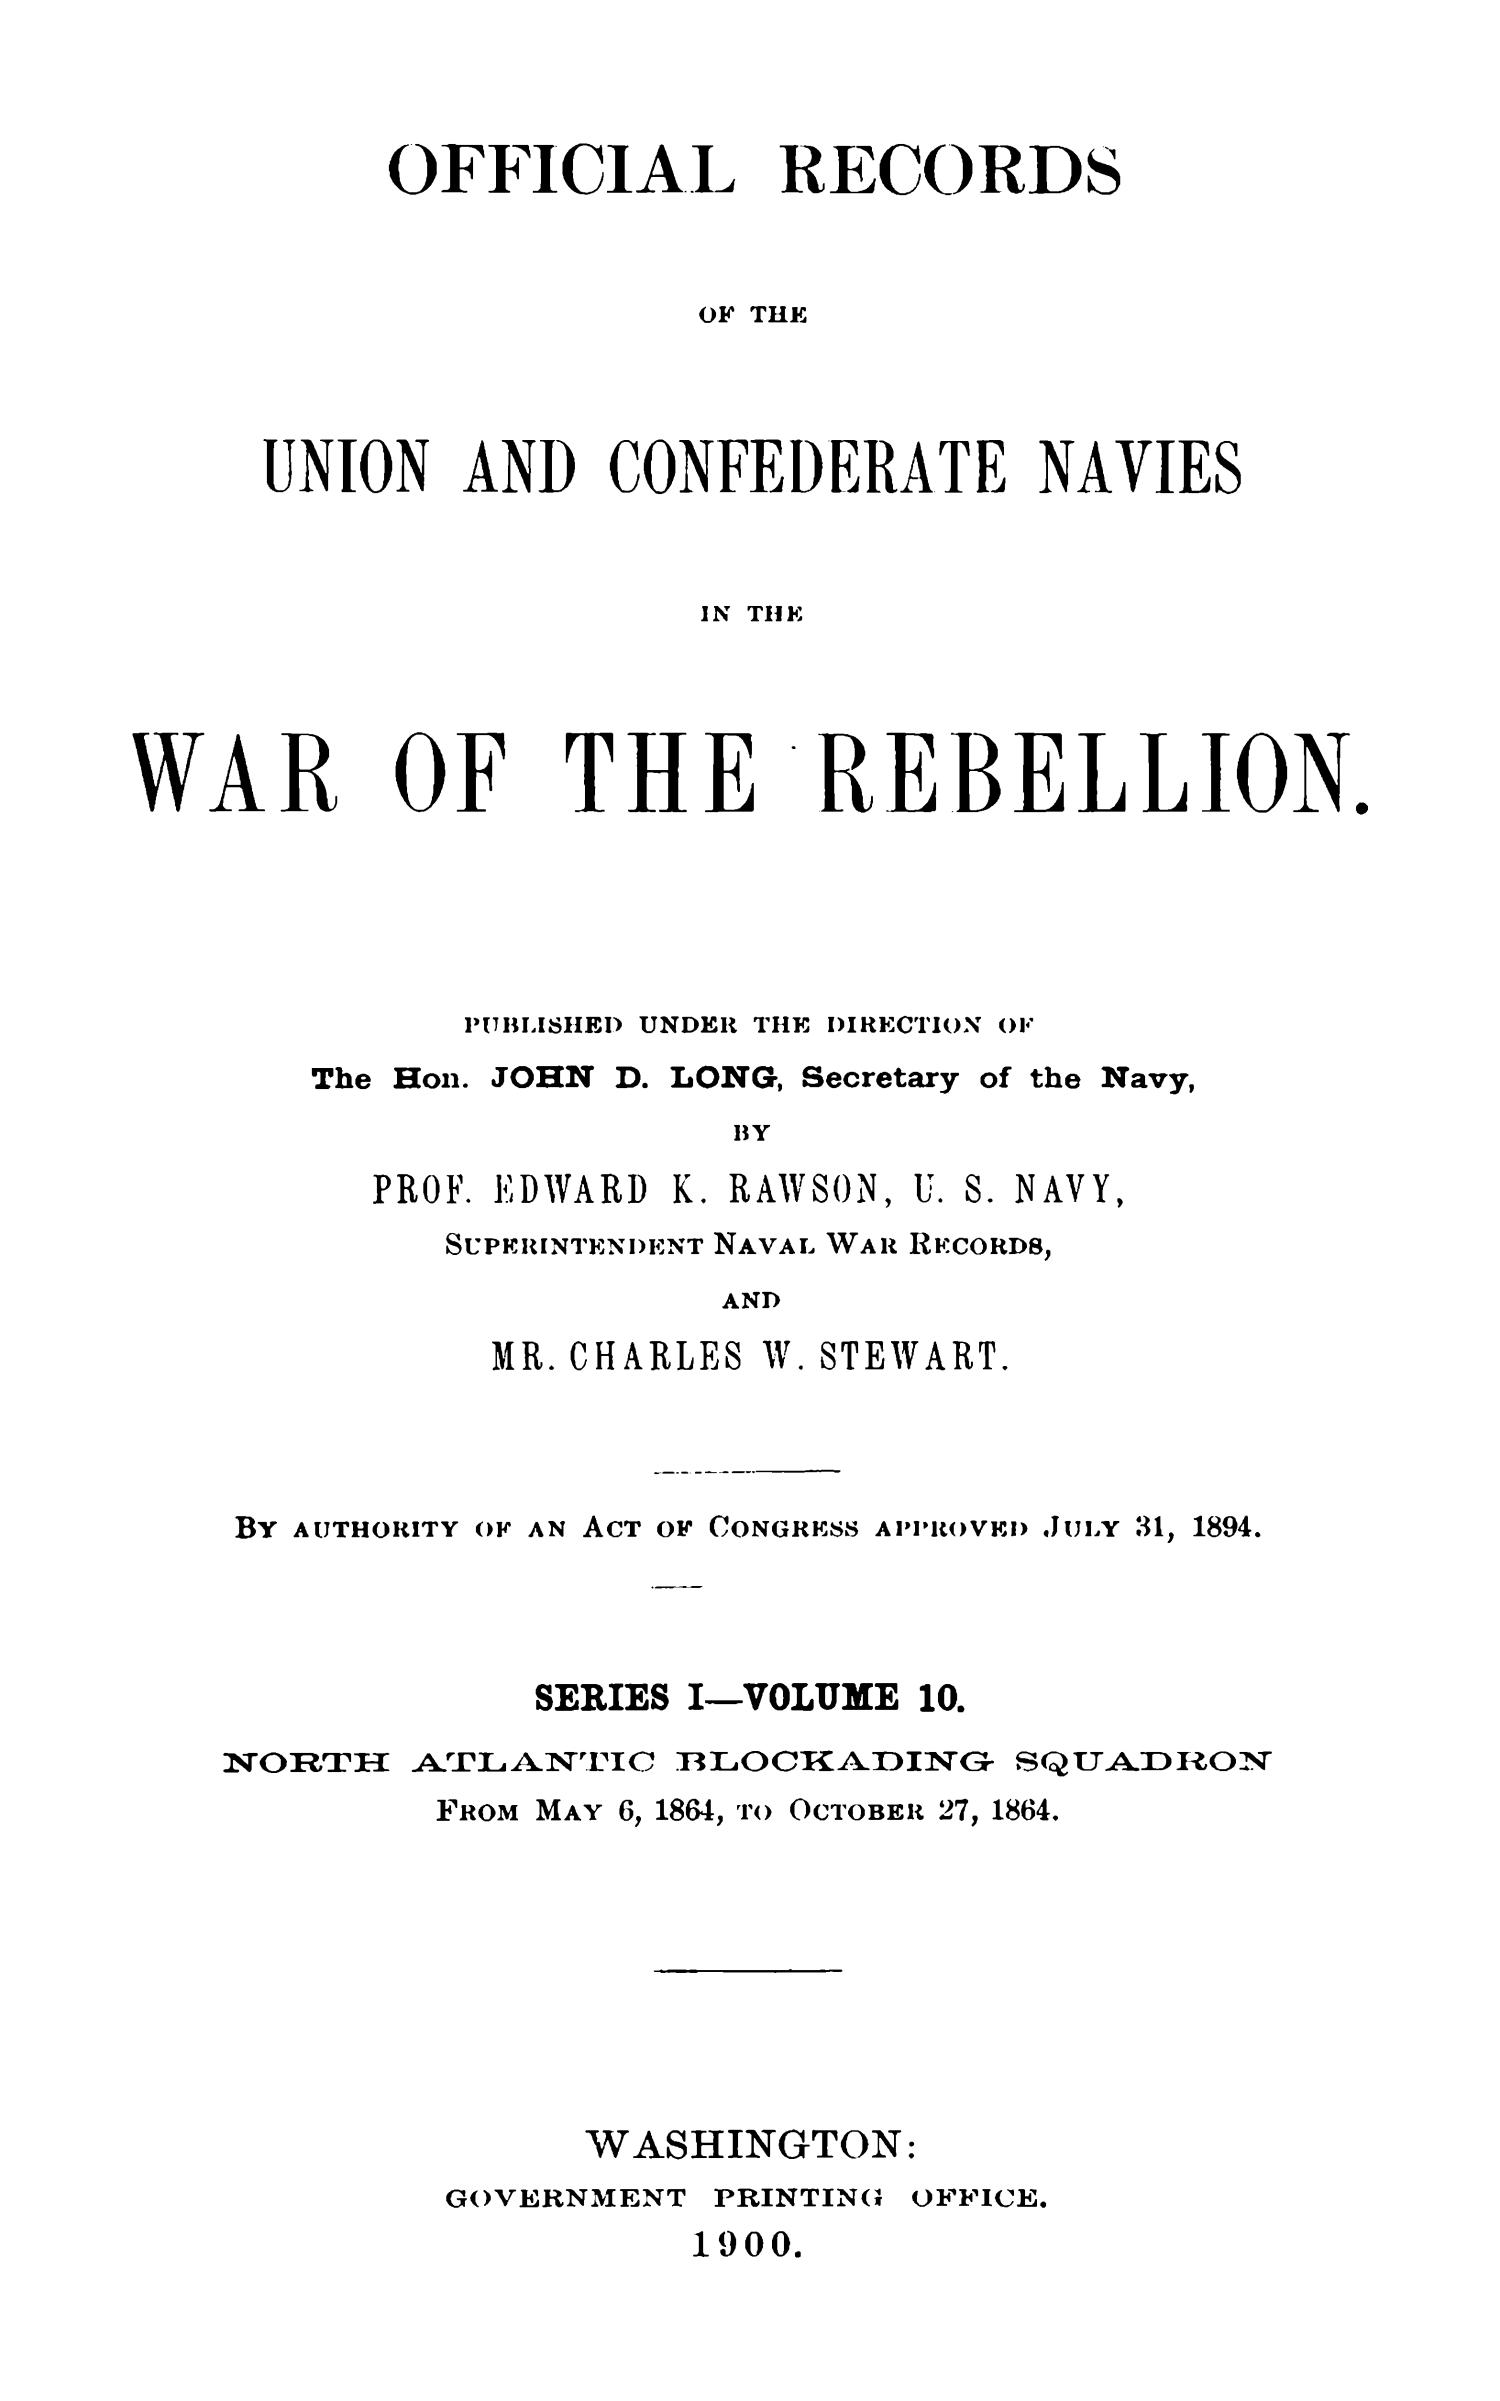 Official Records of the Union and Confederate Navies in the War of the Rebellion. Series 1, Volume 10.
                                                
                                                    Title Page
                                                